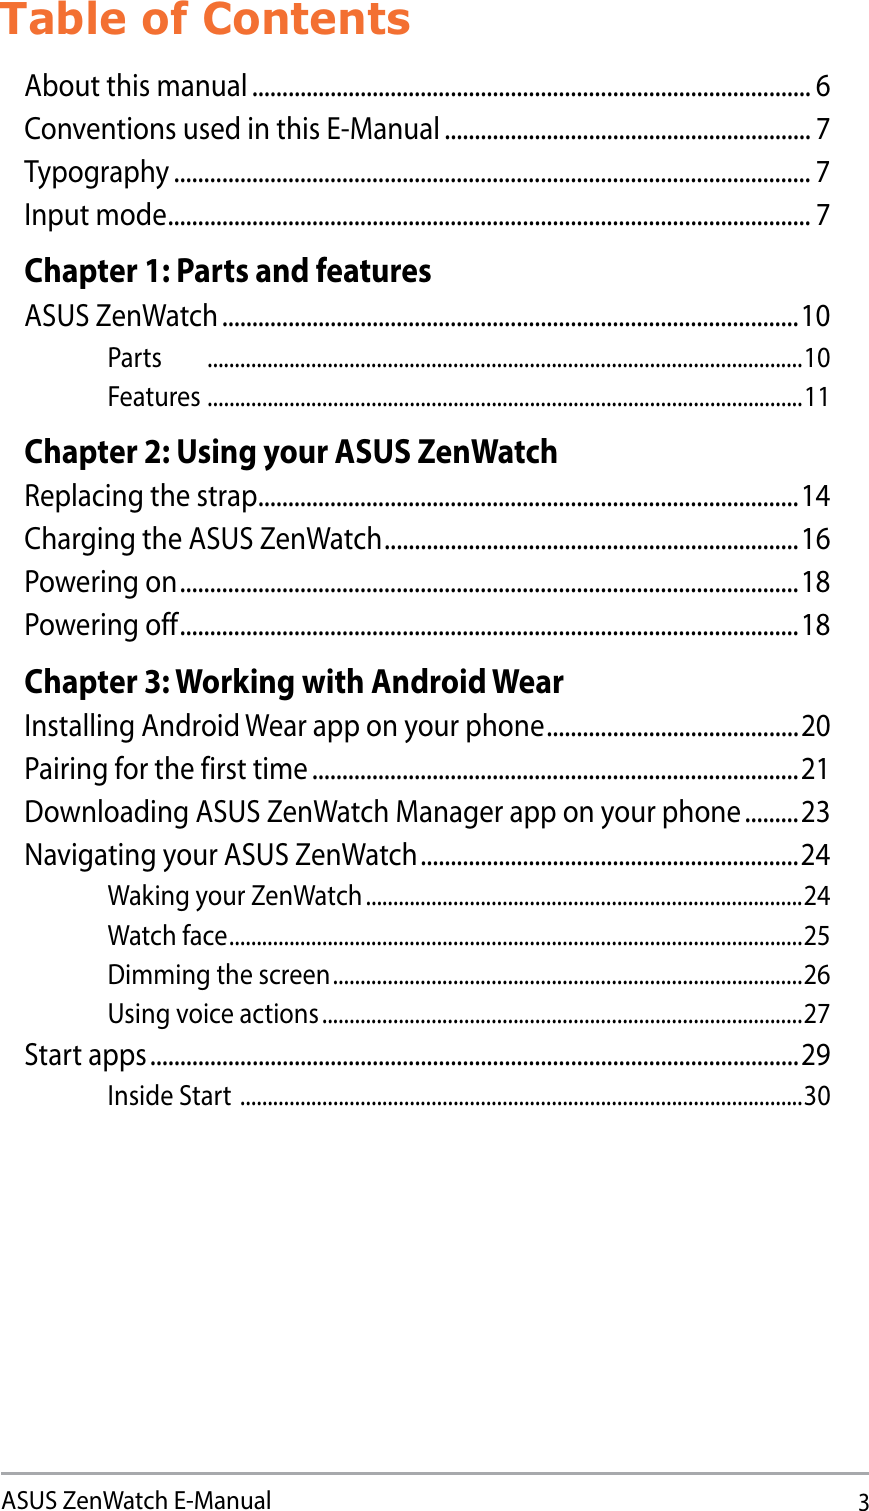 3ASUS ZenWatch E-ManualTable of ContentsAbout this manual ............................................................................................. 6Conventions used in this E-Manual ............................................................. 7Typography .......................................................................................................... 7Input mode ........................................................................................................... 7Chapter 1: Parts and featuresASUS ZenWatch ................................................................................................10Parts .............................................................................................................10Features .............................................................................................................11Chapter 2: Using your ASUS ZenWatchReplacing the strap ..........................................................................................14Charging the ASUS ZenWatch .....................................................................16Powering on .......................................................................................................18Powering off .......................................................................................................18Chapter 3: Working with Android WearInstalling Android Wear app on your phone ..........................................20Pairing for the first time .................................................................................21Downloading ASUS ZenWatch Manager app on your phone .........23Navigating your ASUS ZenWatch ...............................................................24Waking your ZenWatch ................................................................................24Watch face .........................................................................................................25Dimming the screen ......................................................................................26Using voice actions ........................................................................................27Start apps ............................................................................................................29Inside Start  .......................................................................................................30